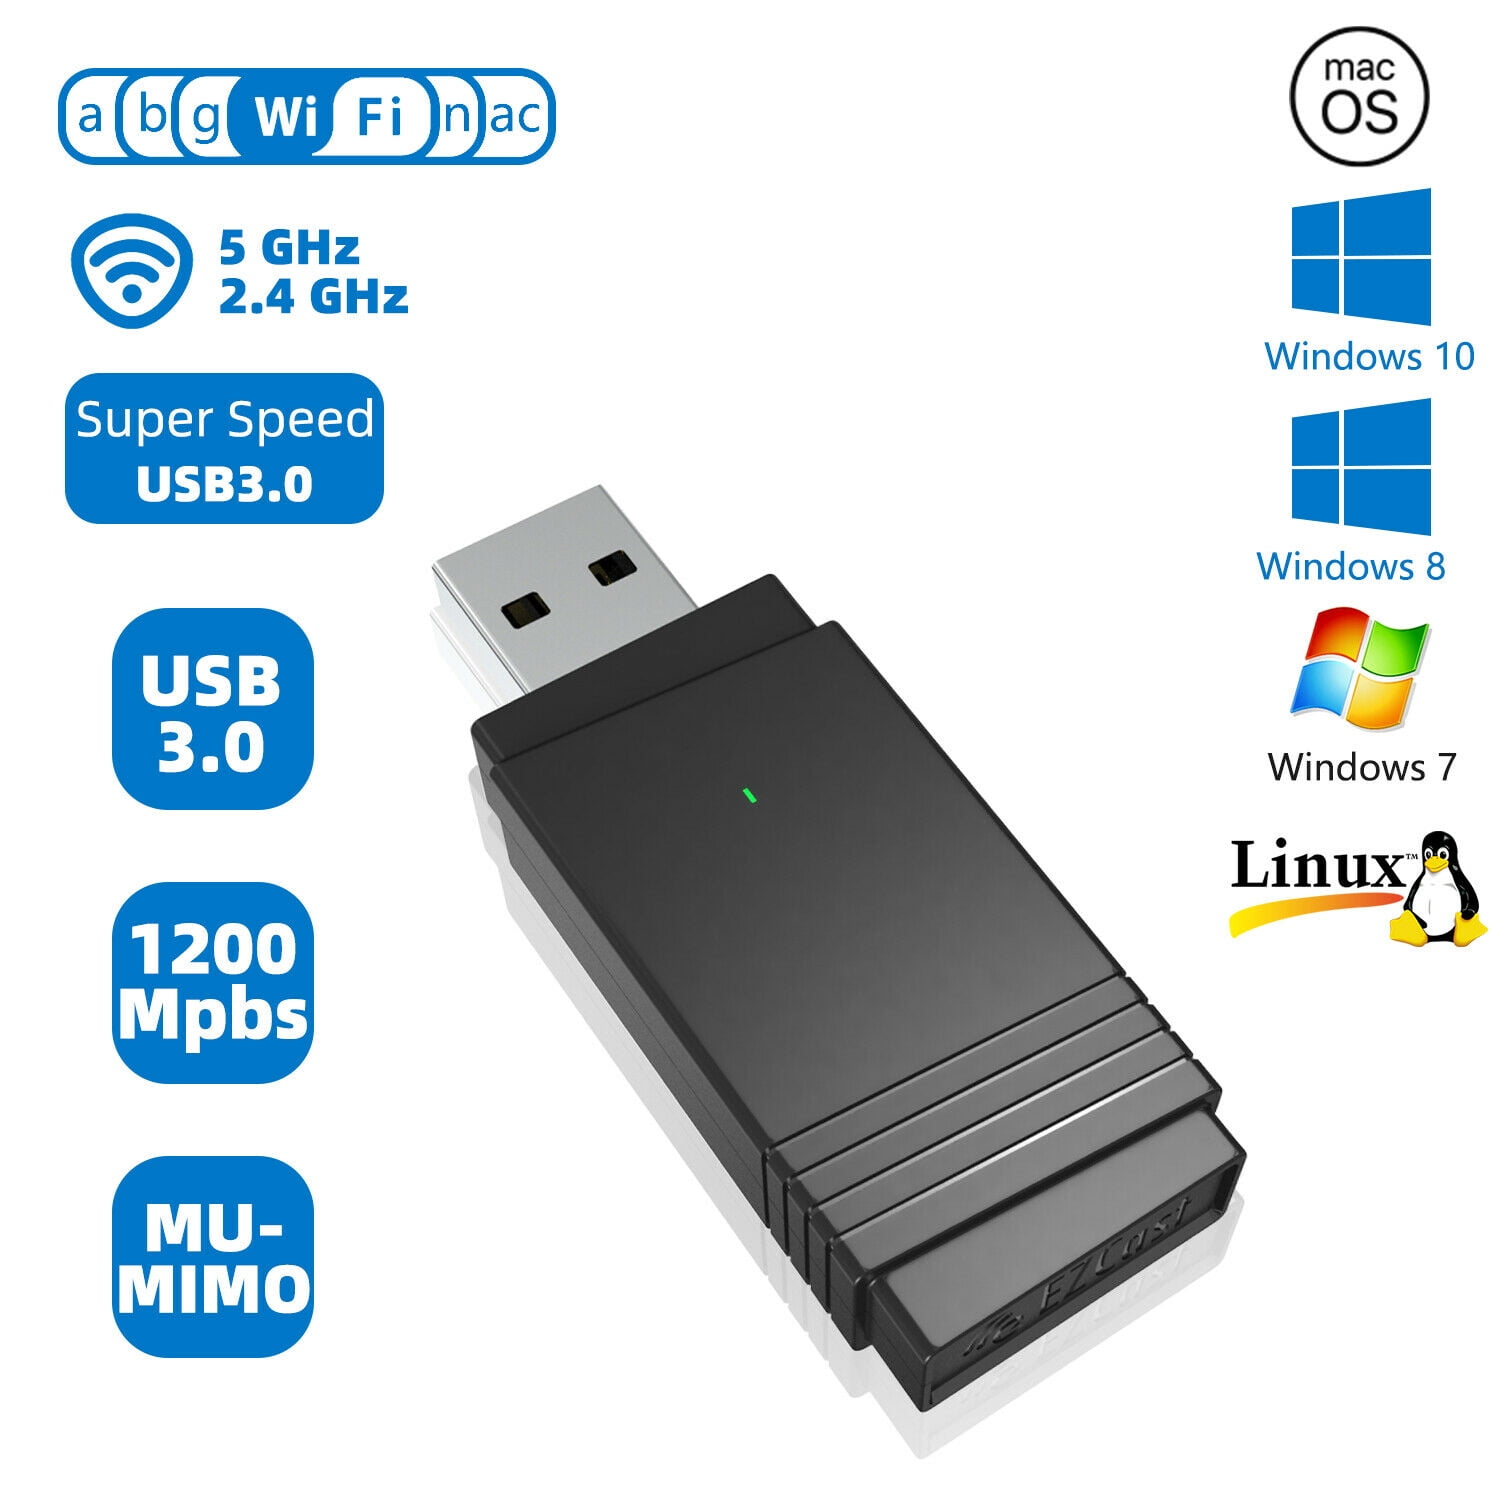 wifi adapter for pc download windows 10